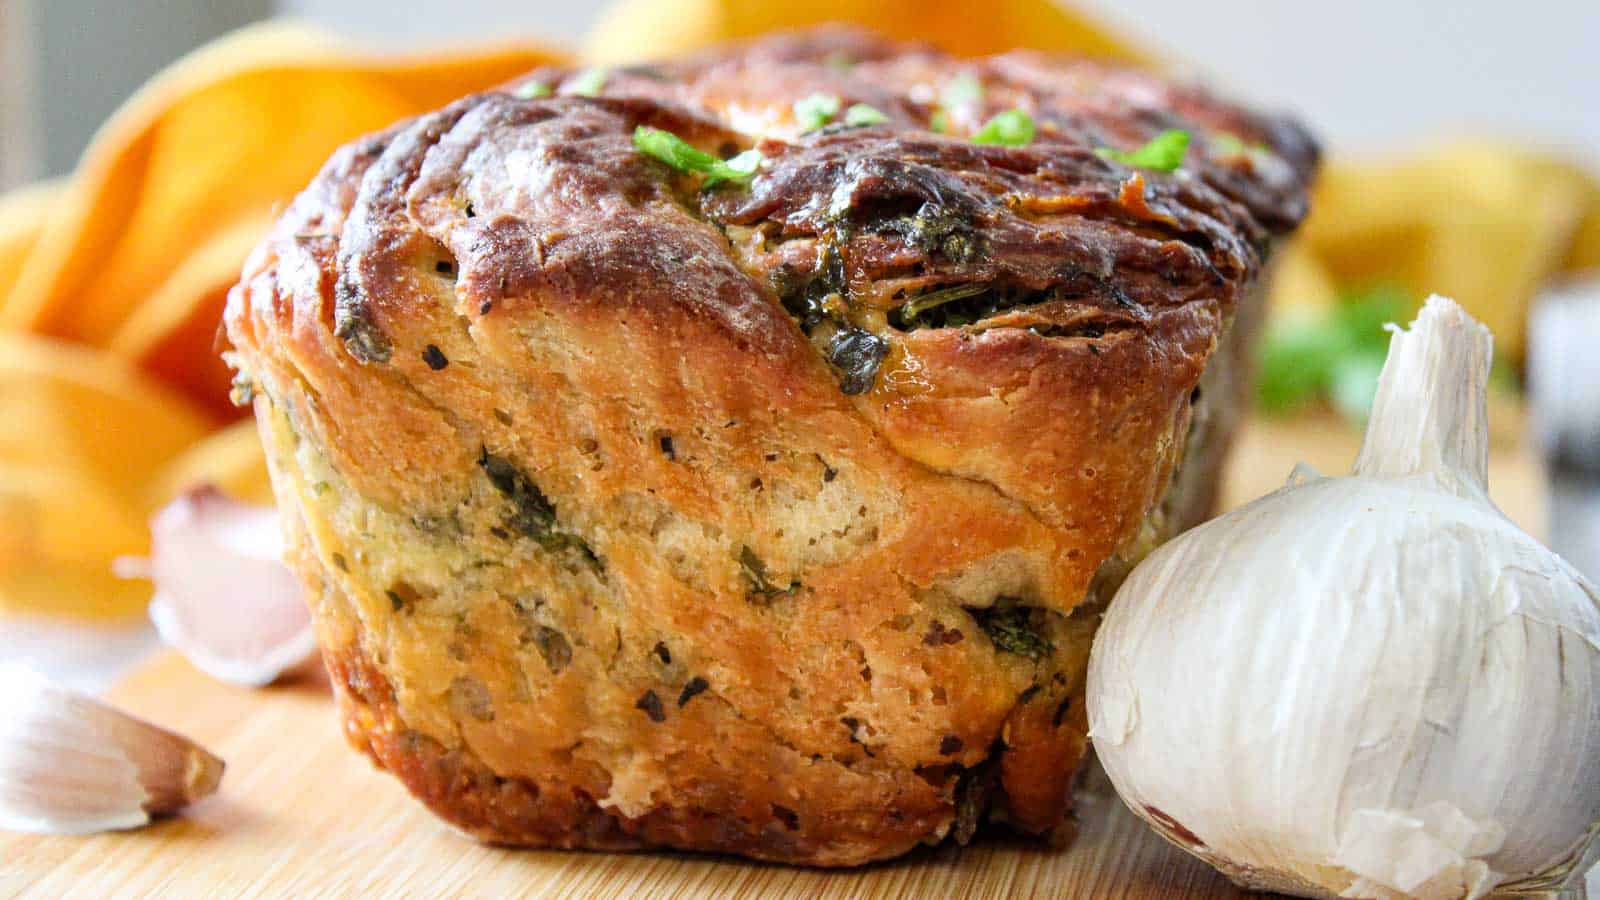 A loaf of bread with garlic and onions on a cutting board.